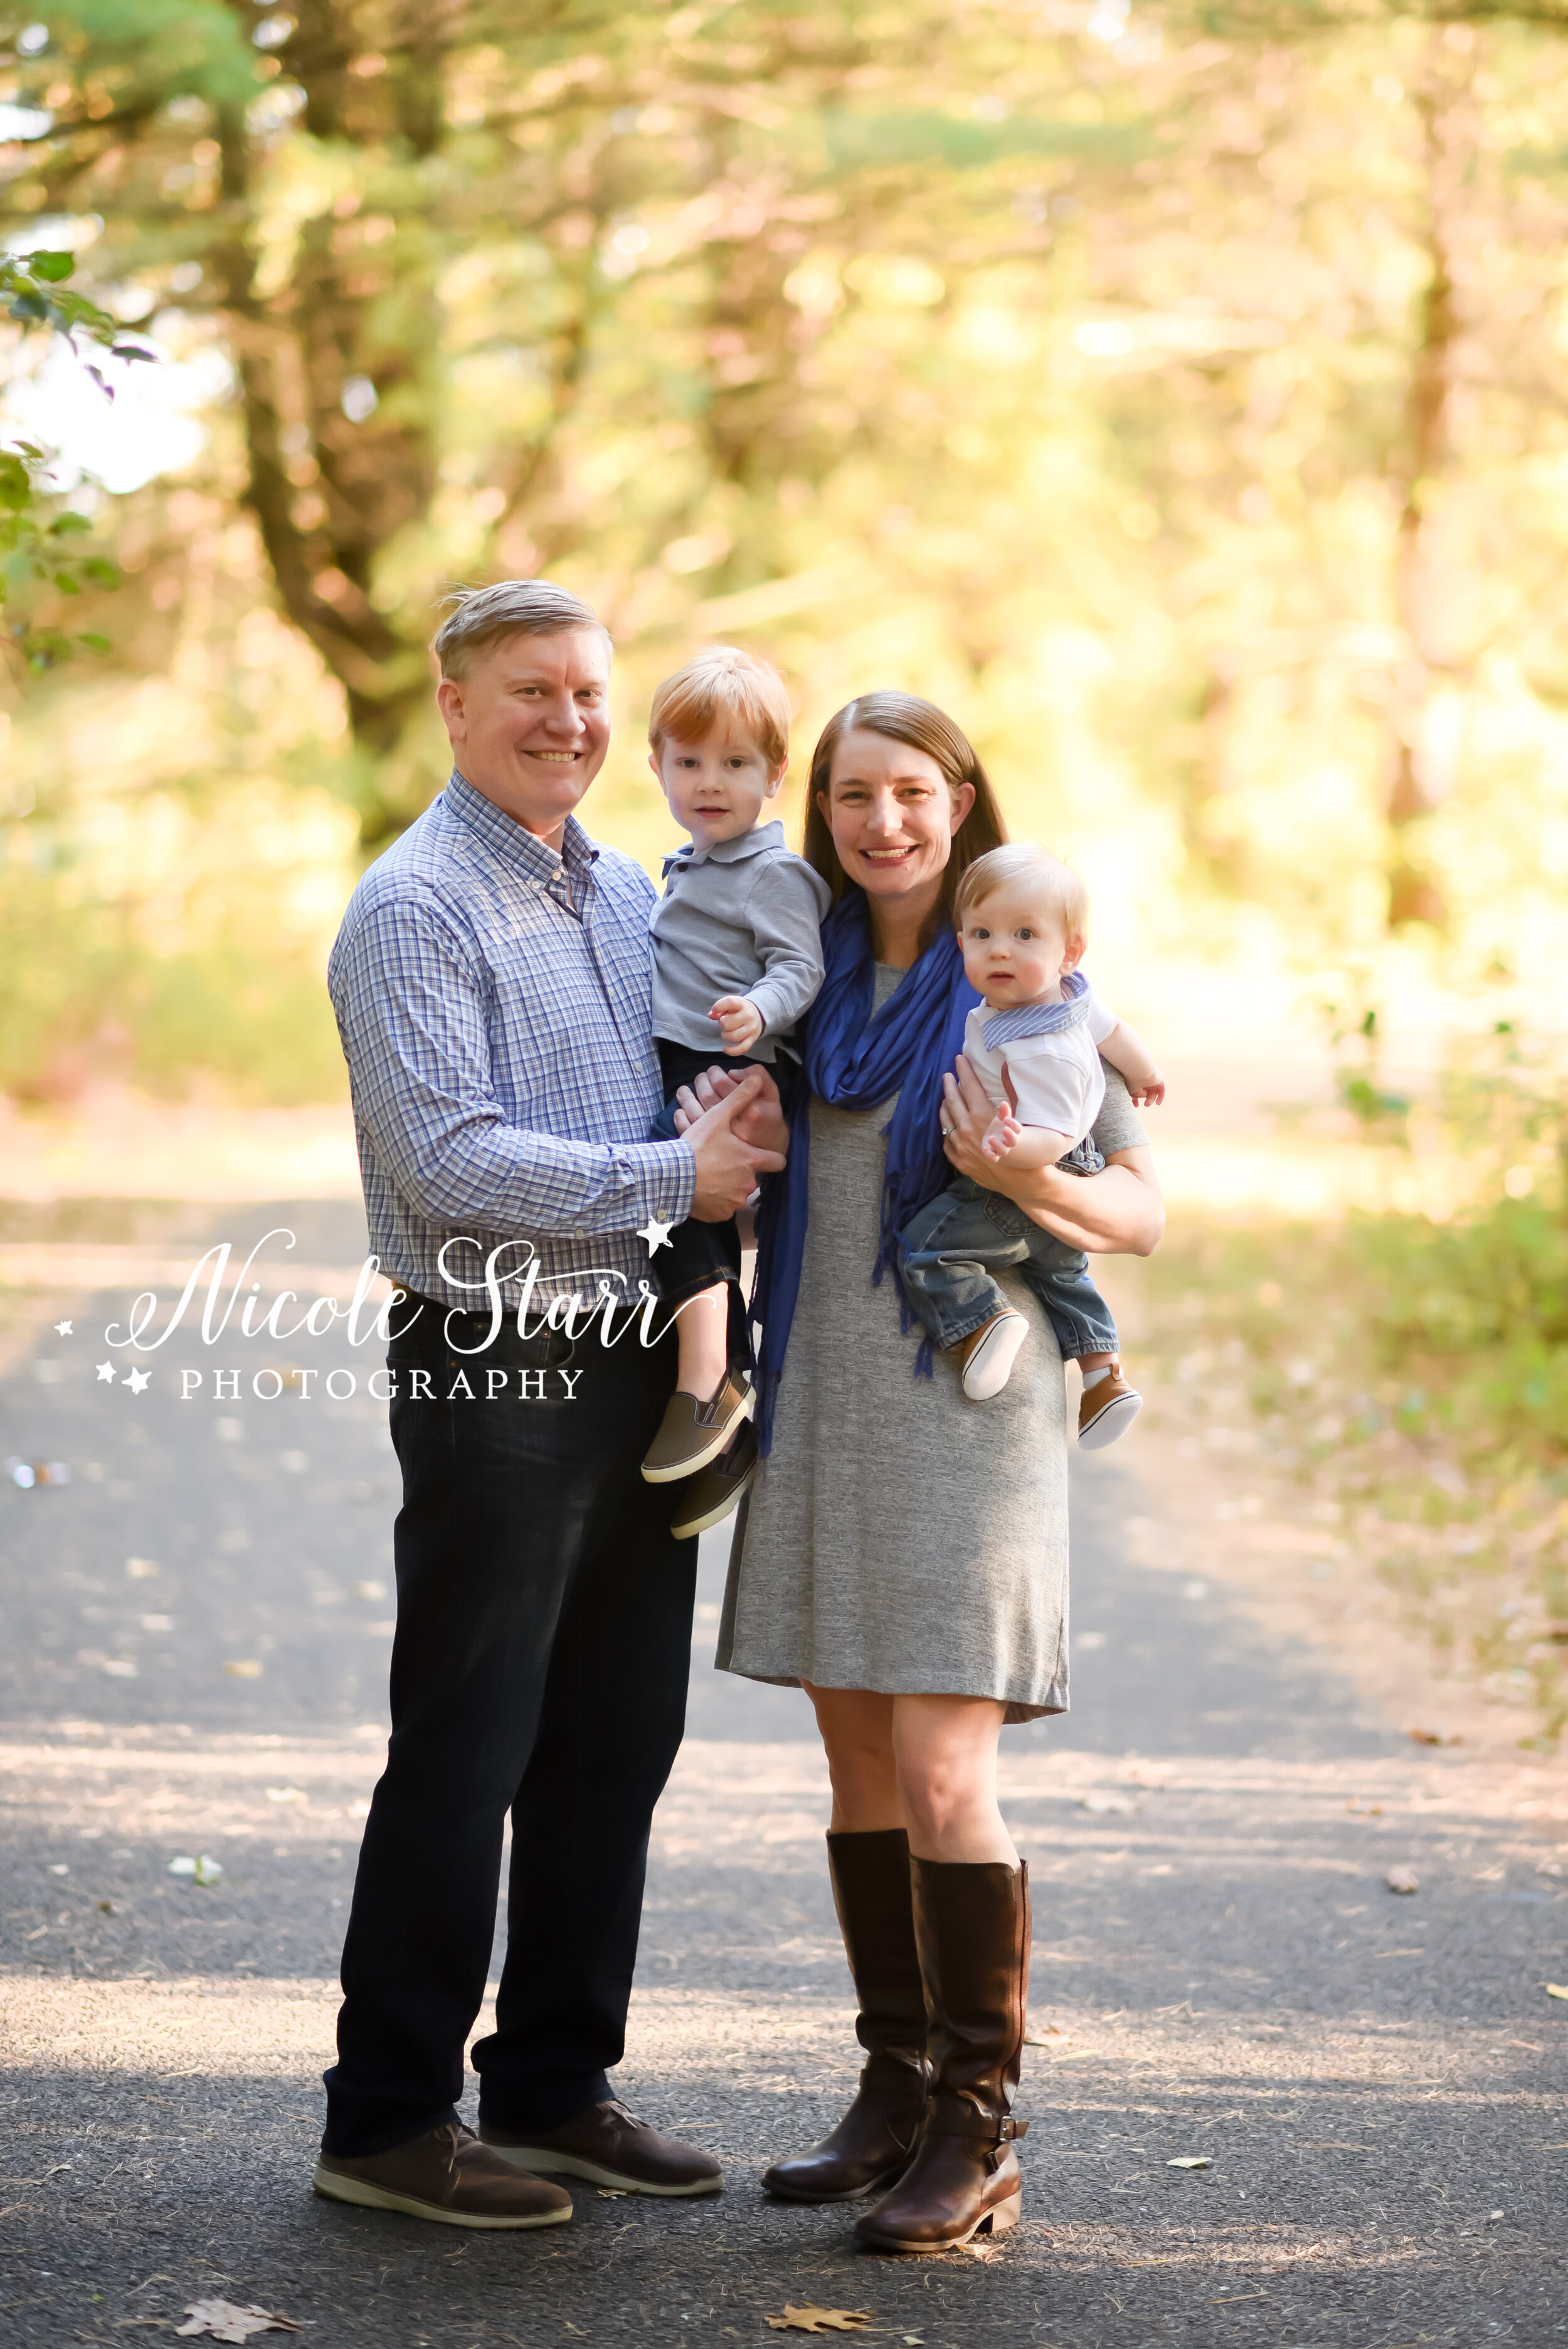 Family Picture Pose Ideas with 4 Children - Capturing Joy with Kristen Duke